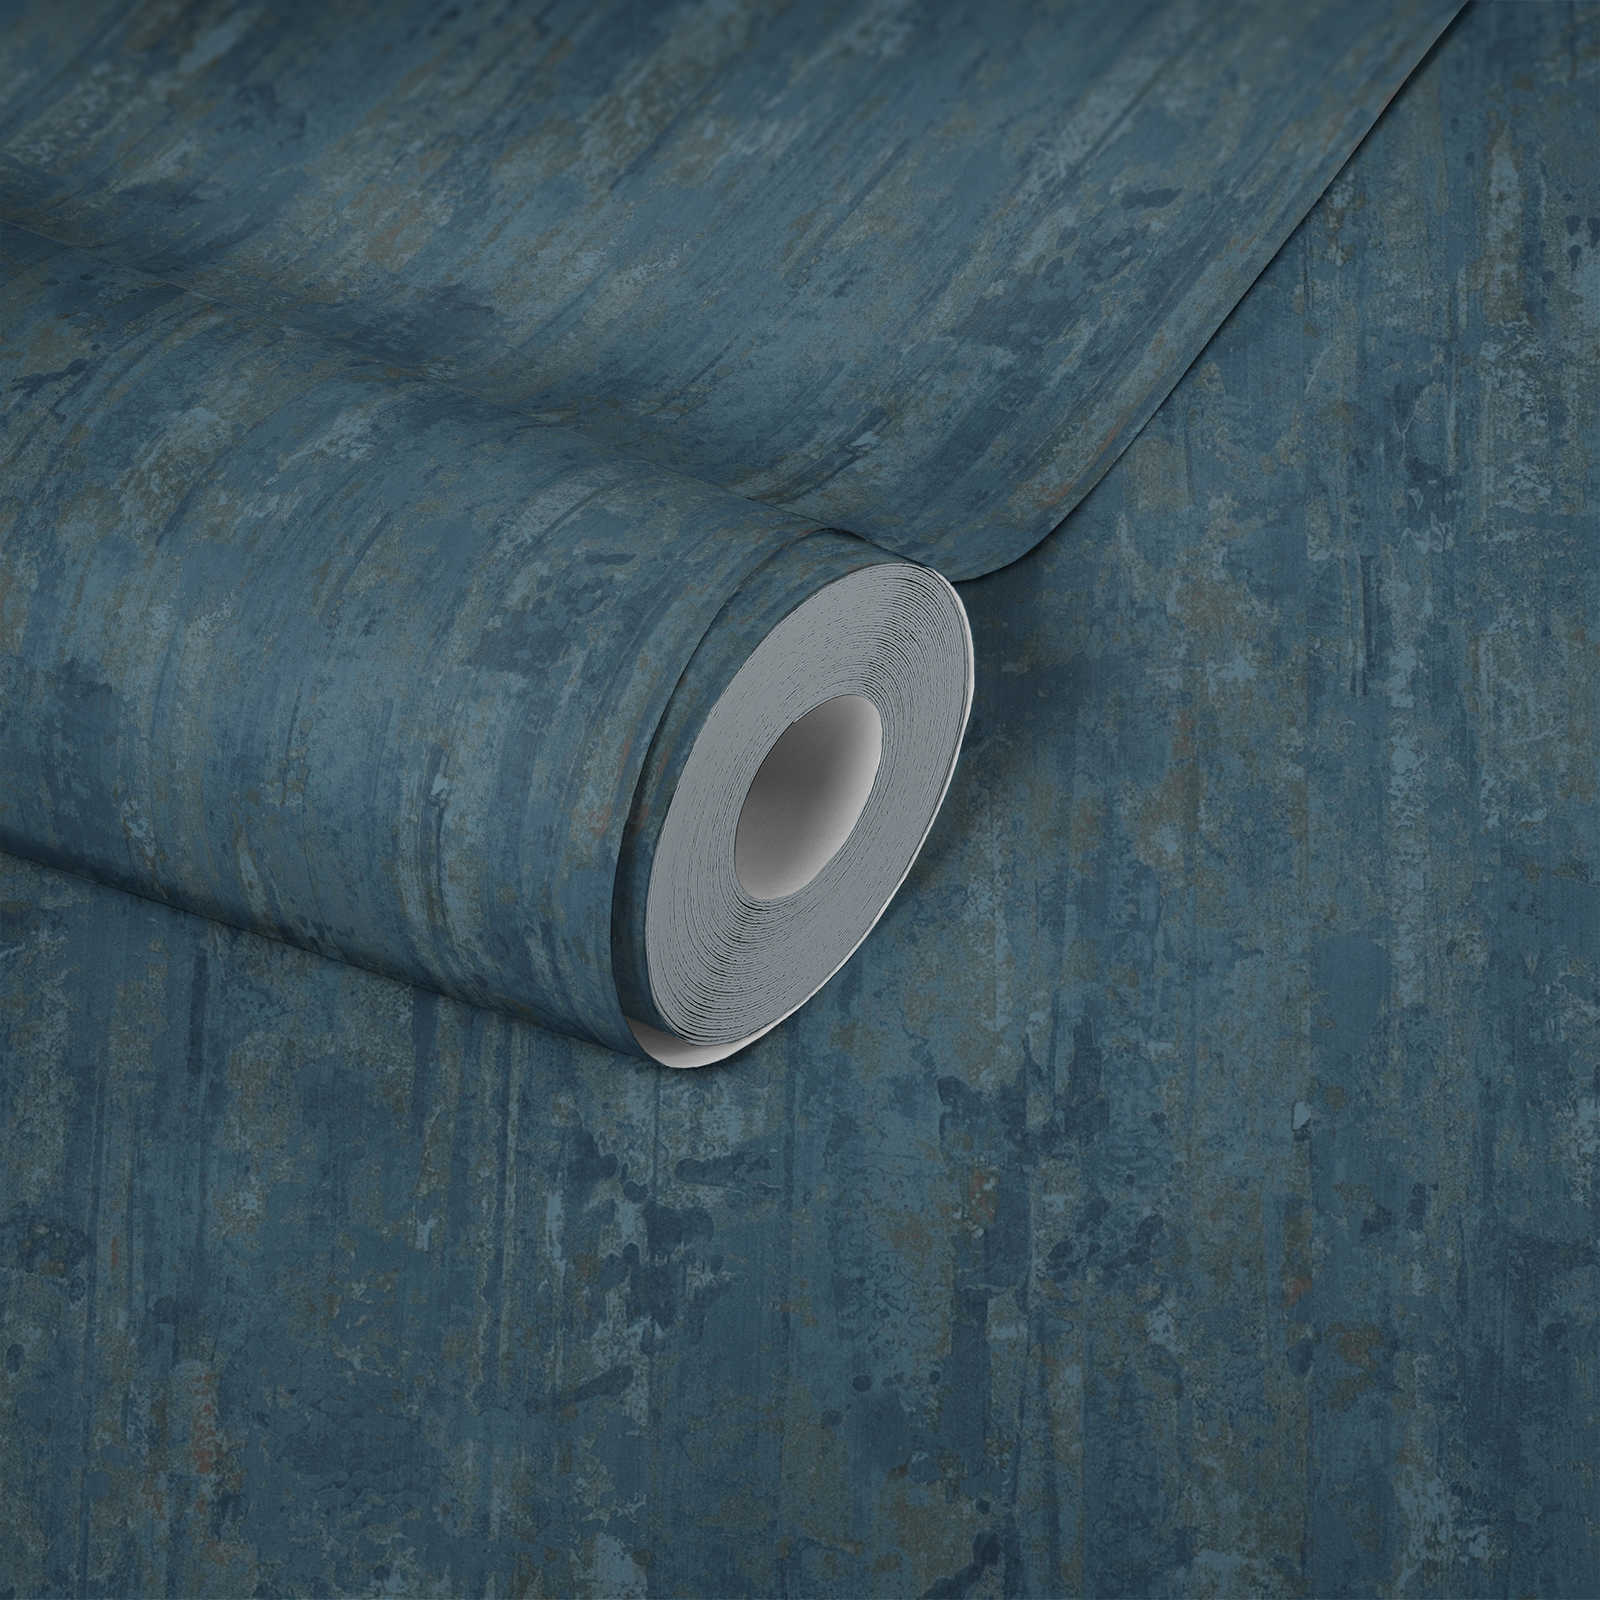             Ethno wallpaper with textured pattern in wood look - blue
        